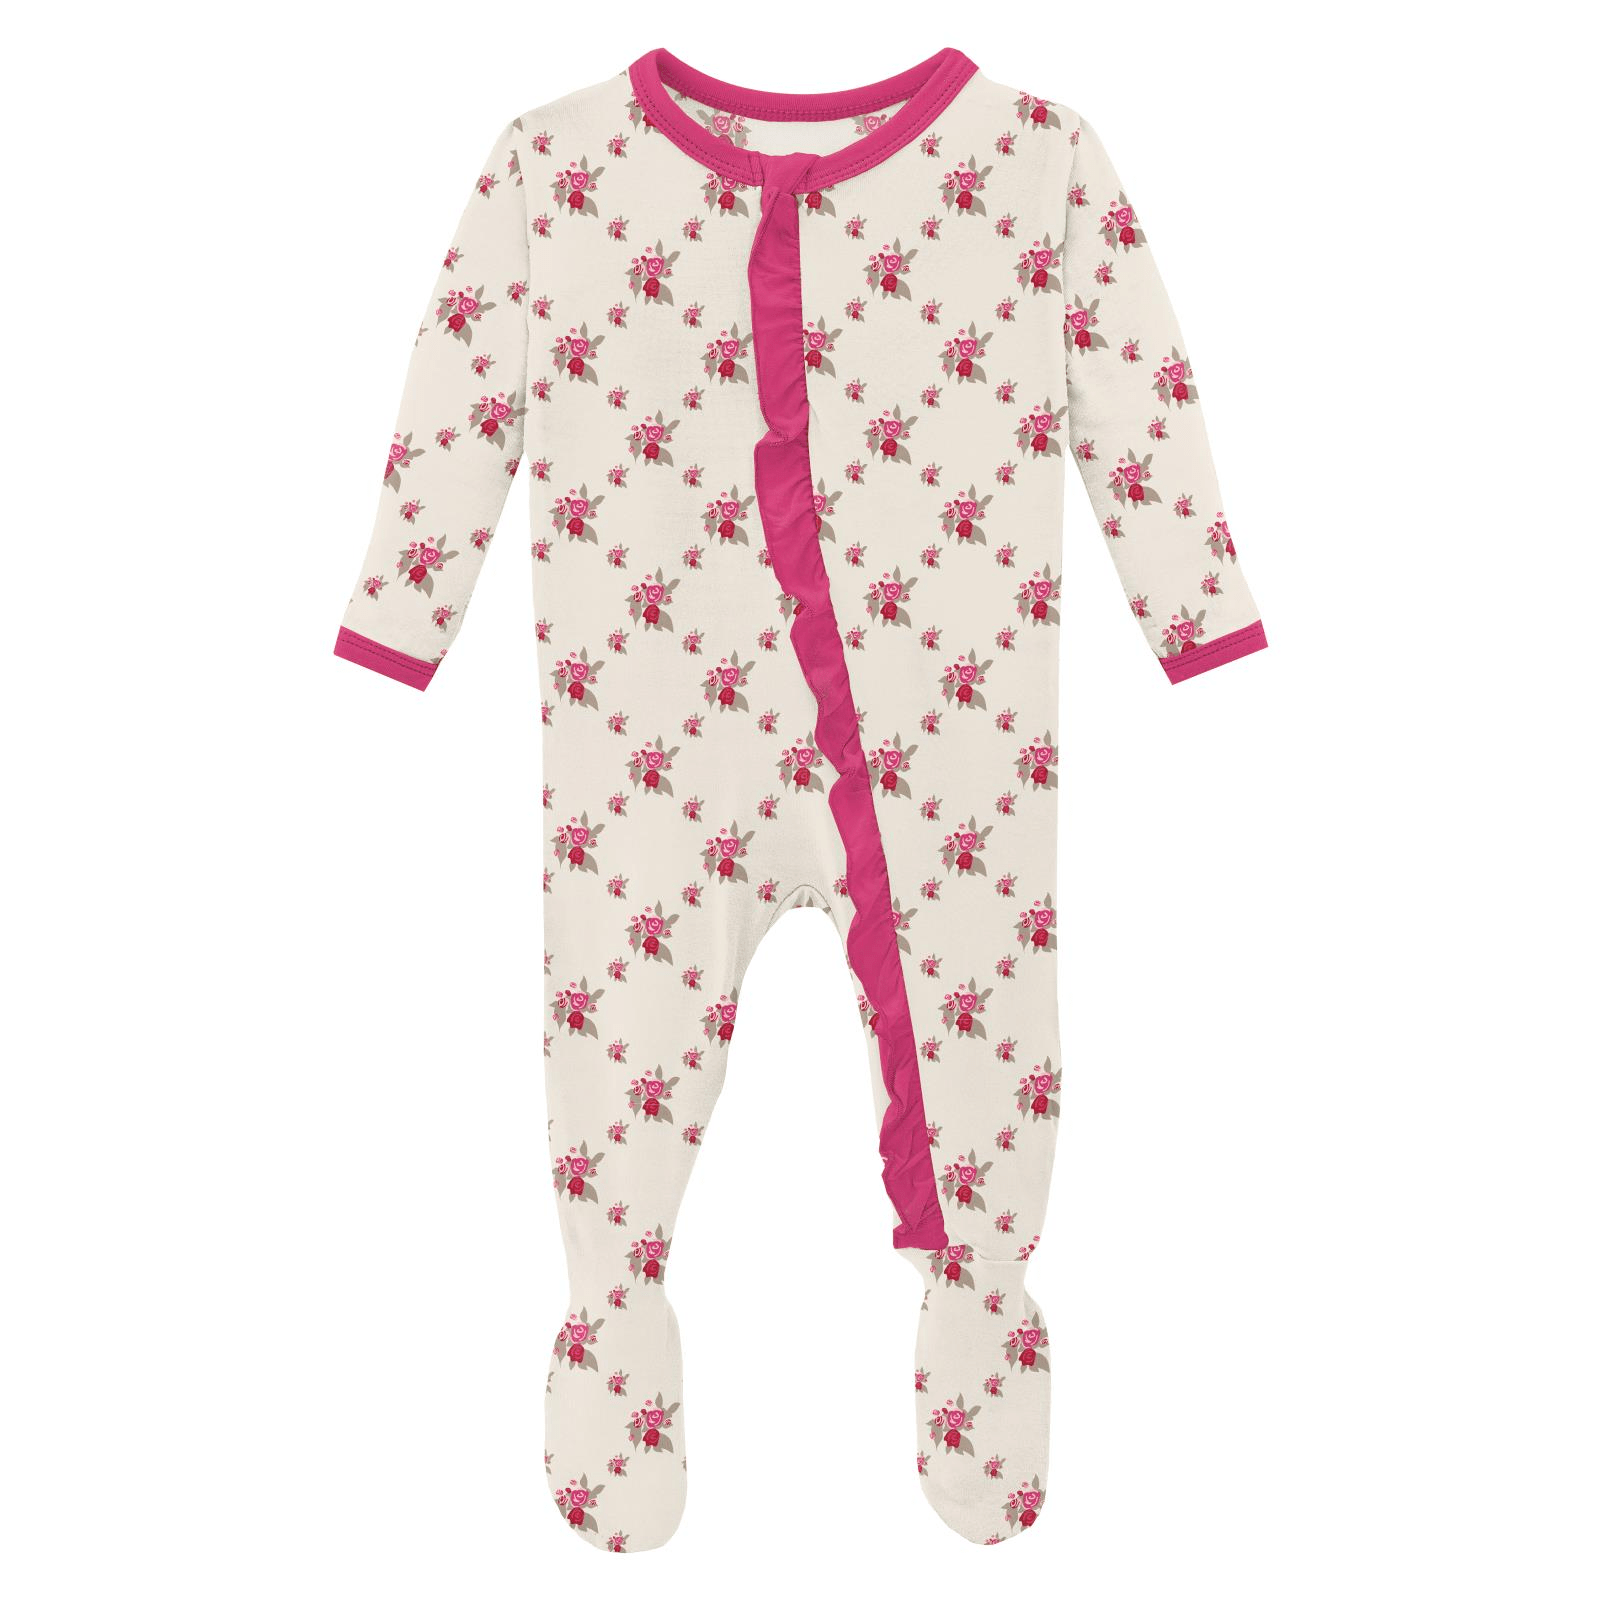 Classic Ruffle Footie with Zipper in Natural Rose Trellis - Twinkle Twinkle Little One